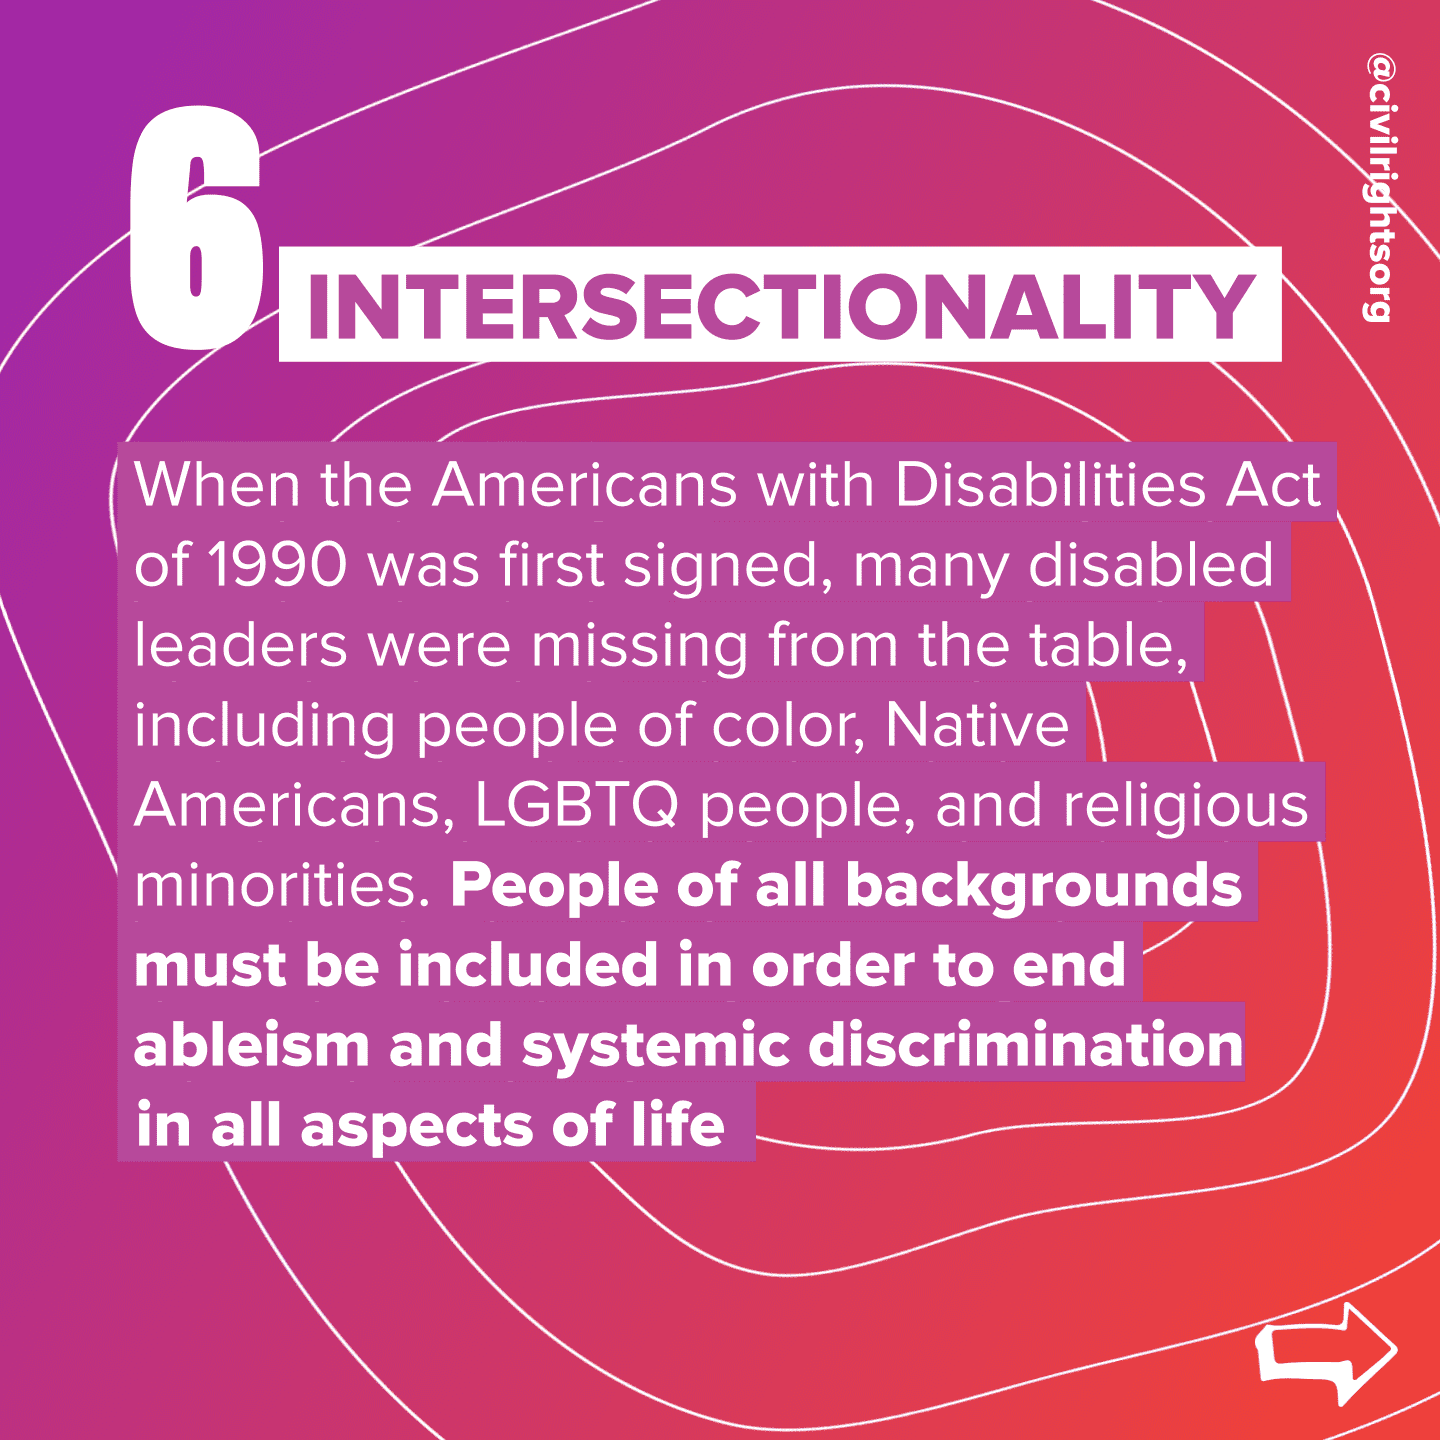 Number 6. Title “Intersectionality,” When the Americans with Disabilities Act of 1990 was first signed, many disabled leaders were missing from the table, including people of color, Native Americans, LGBTQ people, and religious minorities. People of all backgrounds must be included in order to end ableism and systemic discrimination in all aspects of life. Swipe right arrow.